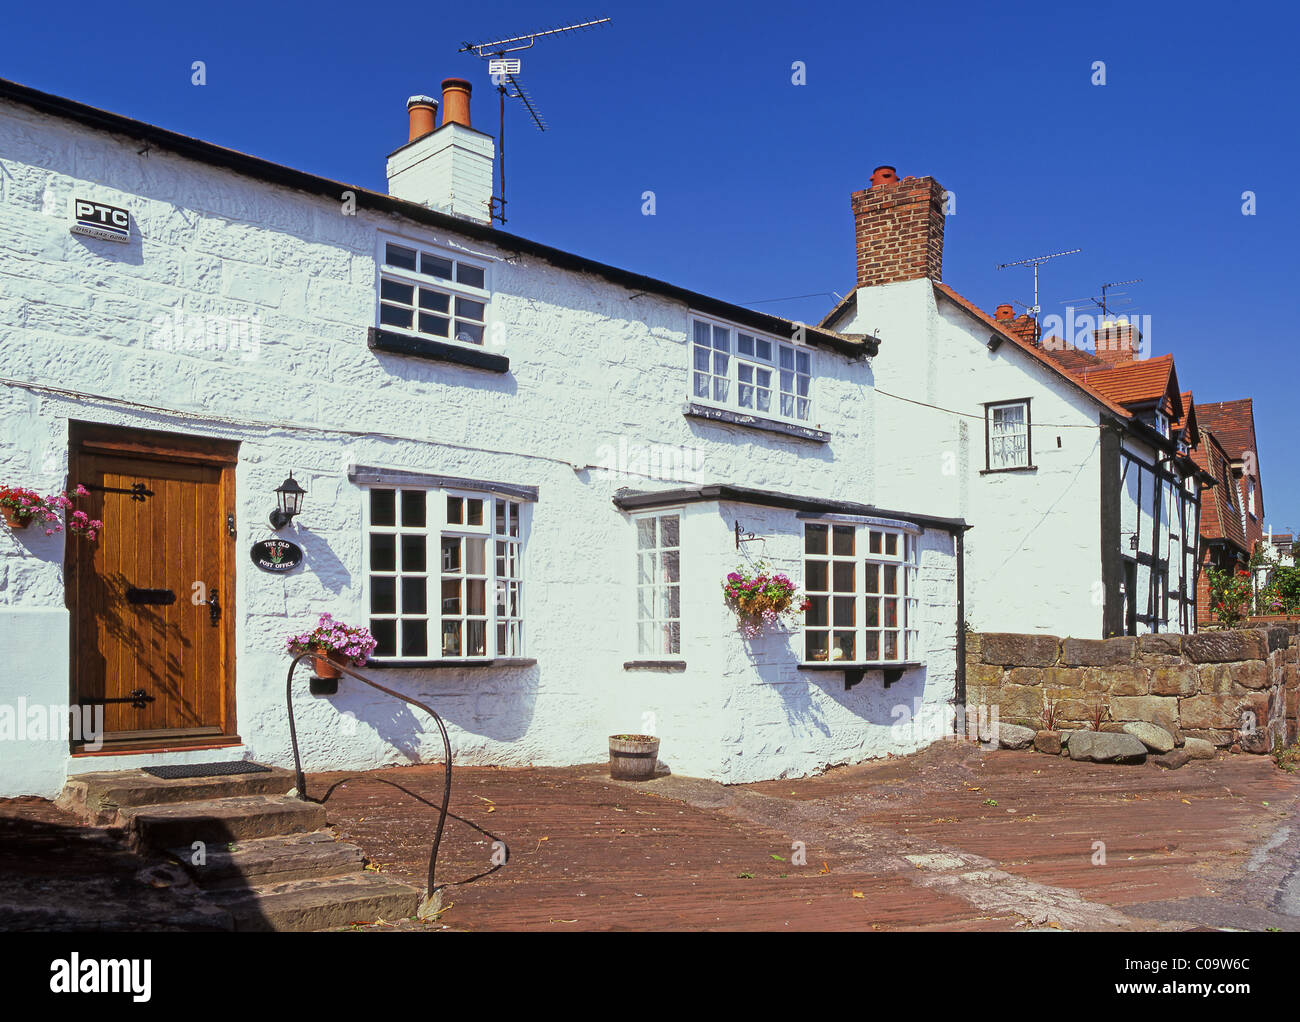 The Old Post Office & Other Attractive Cottages, Village of Burton, The Wirral, Cheshire, England, UK Stock Photo